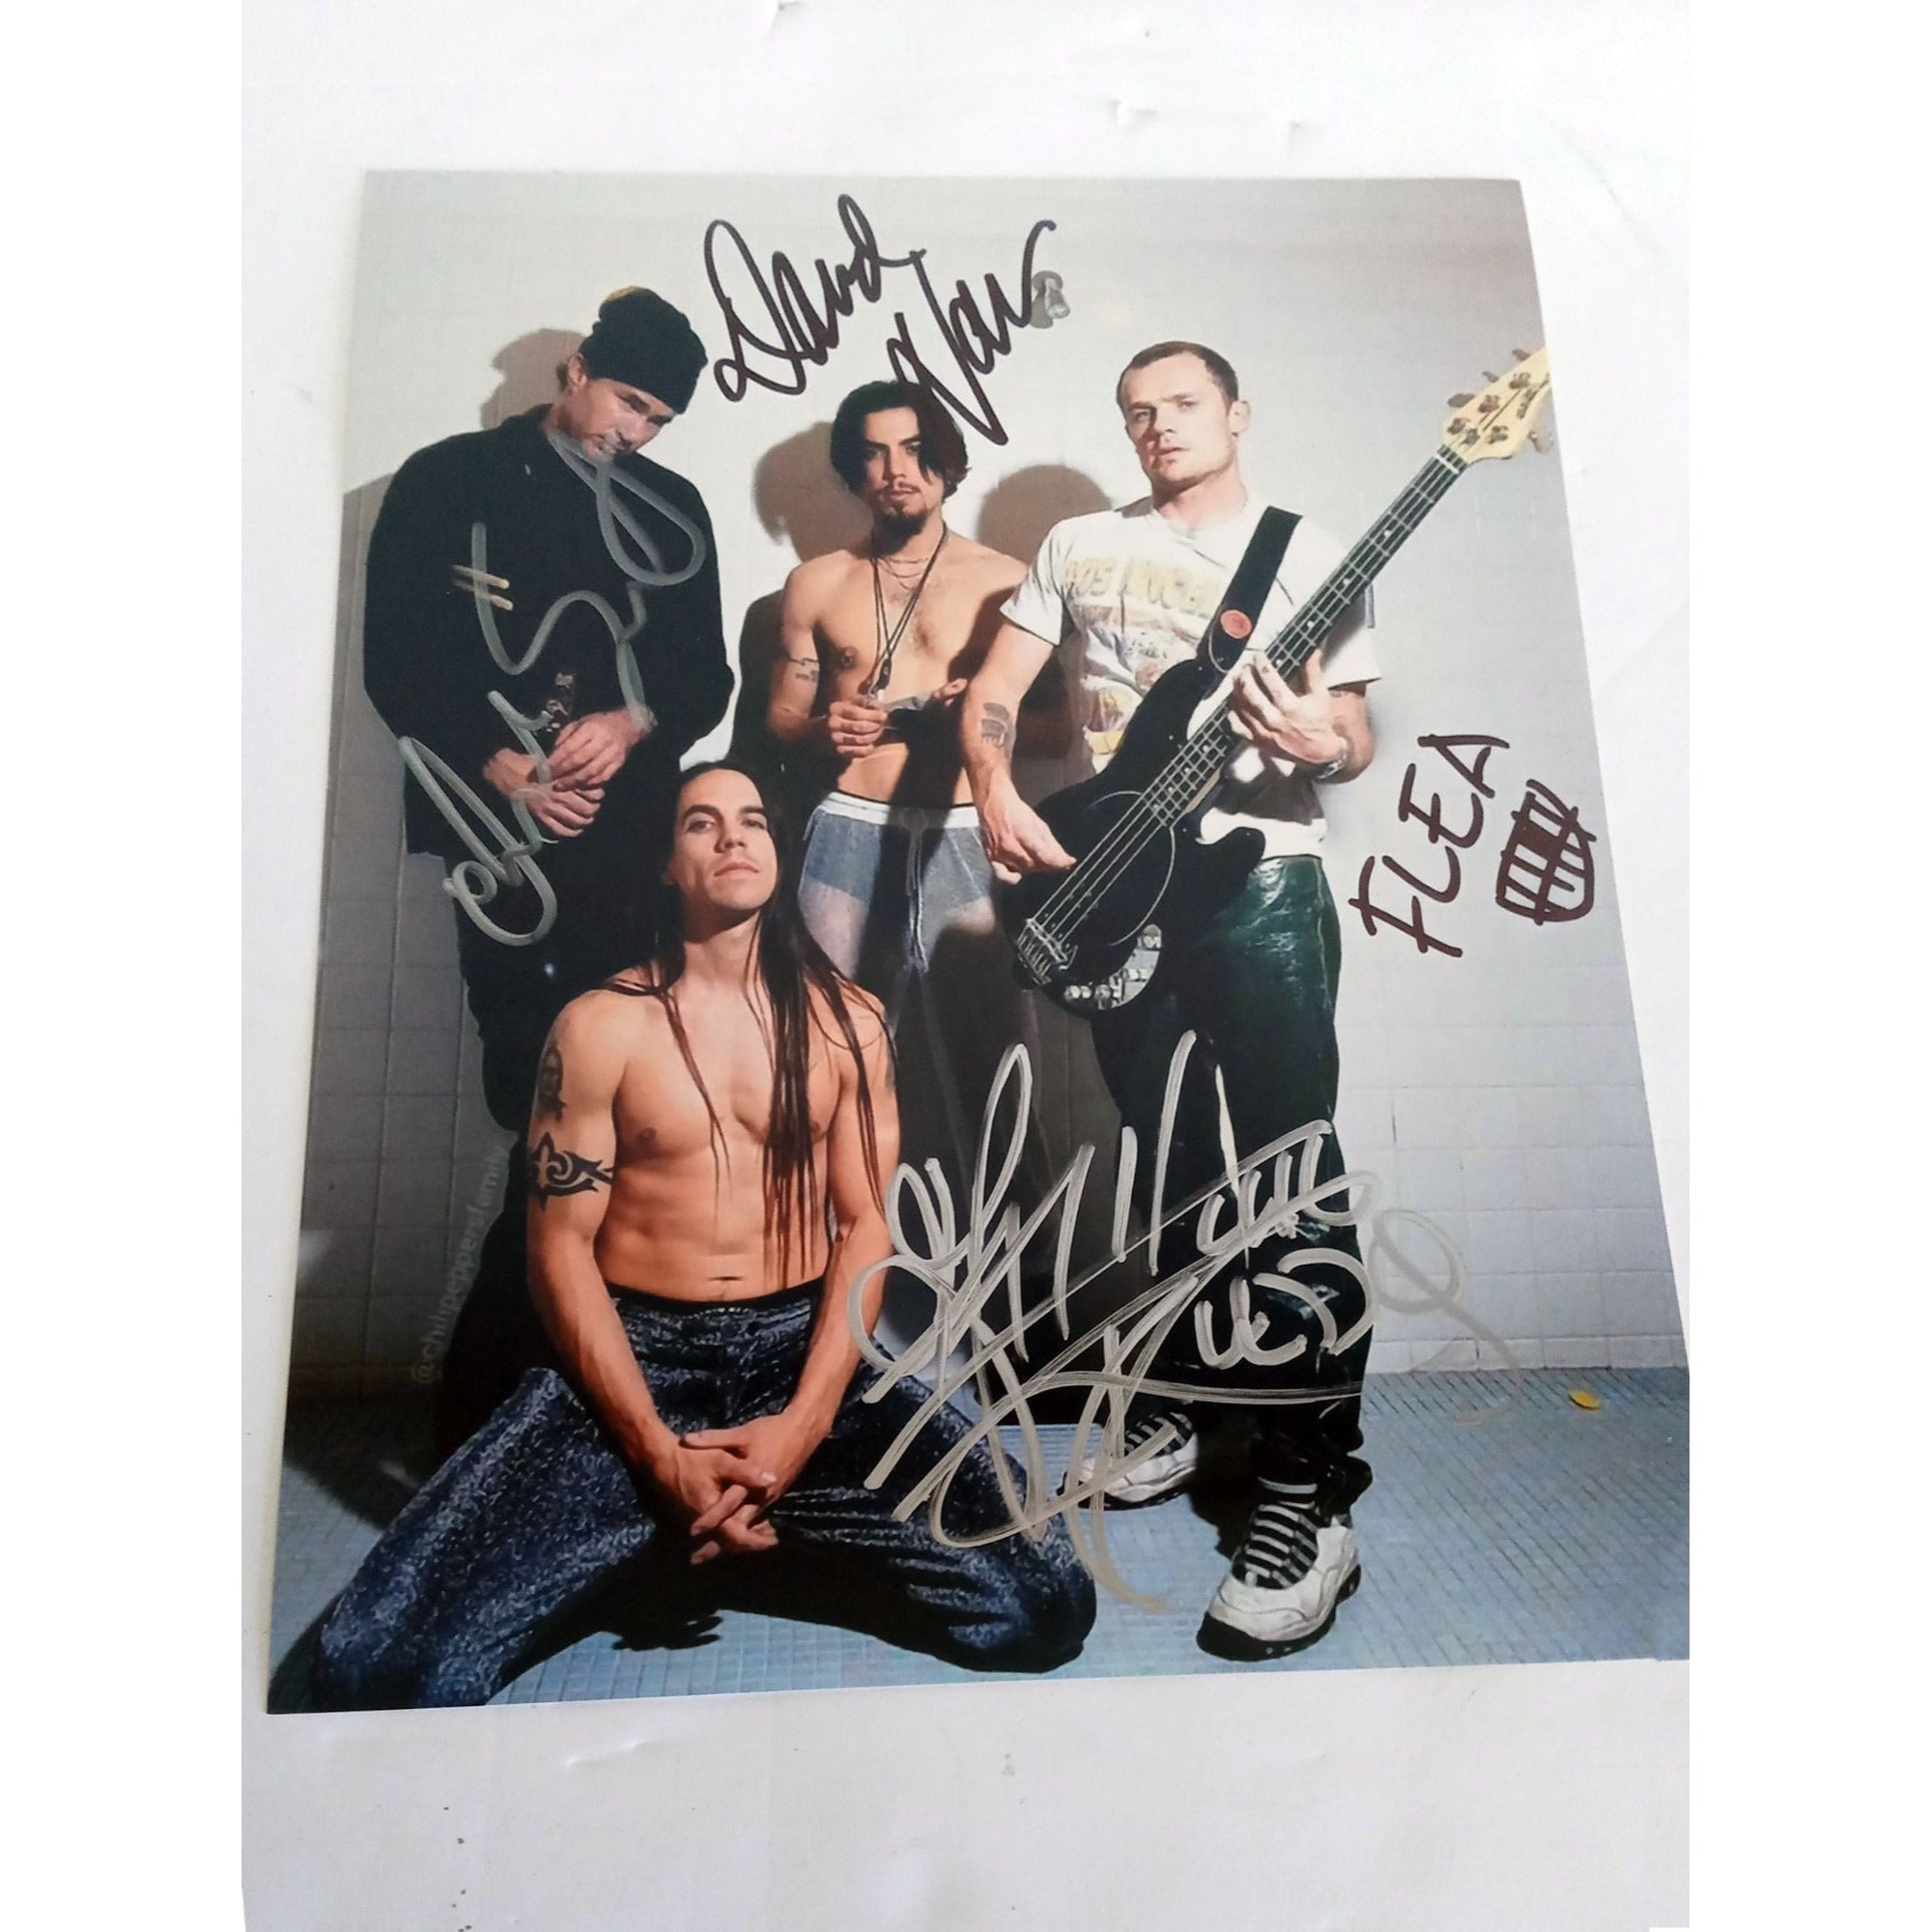 Anthony Kiedis, Flea, Red Hot Chili Peppers 8 by 10 signed photo with proof